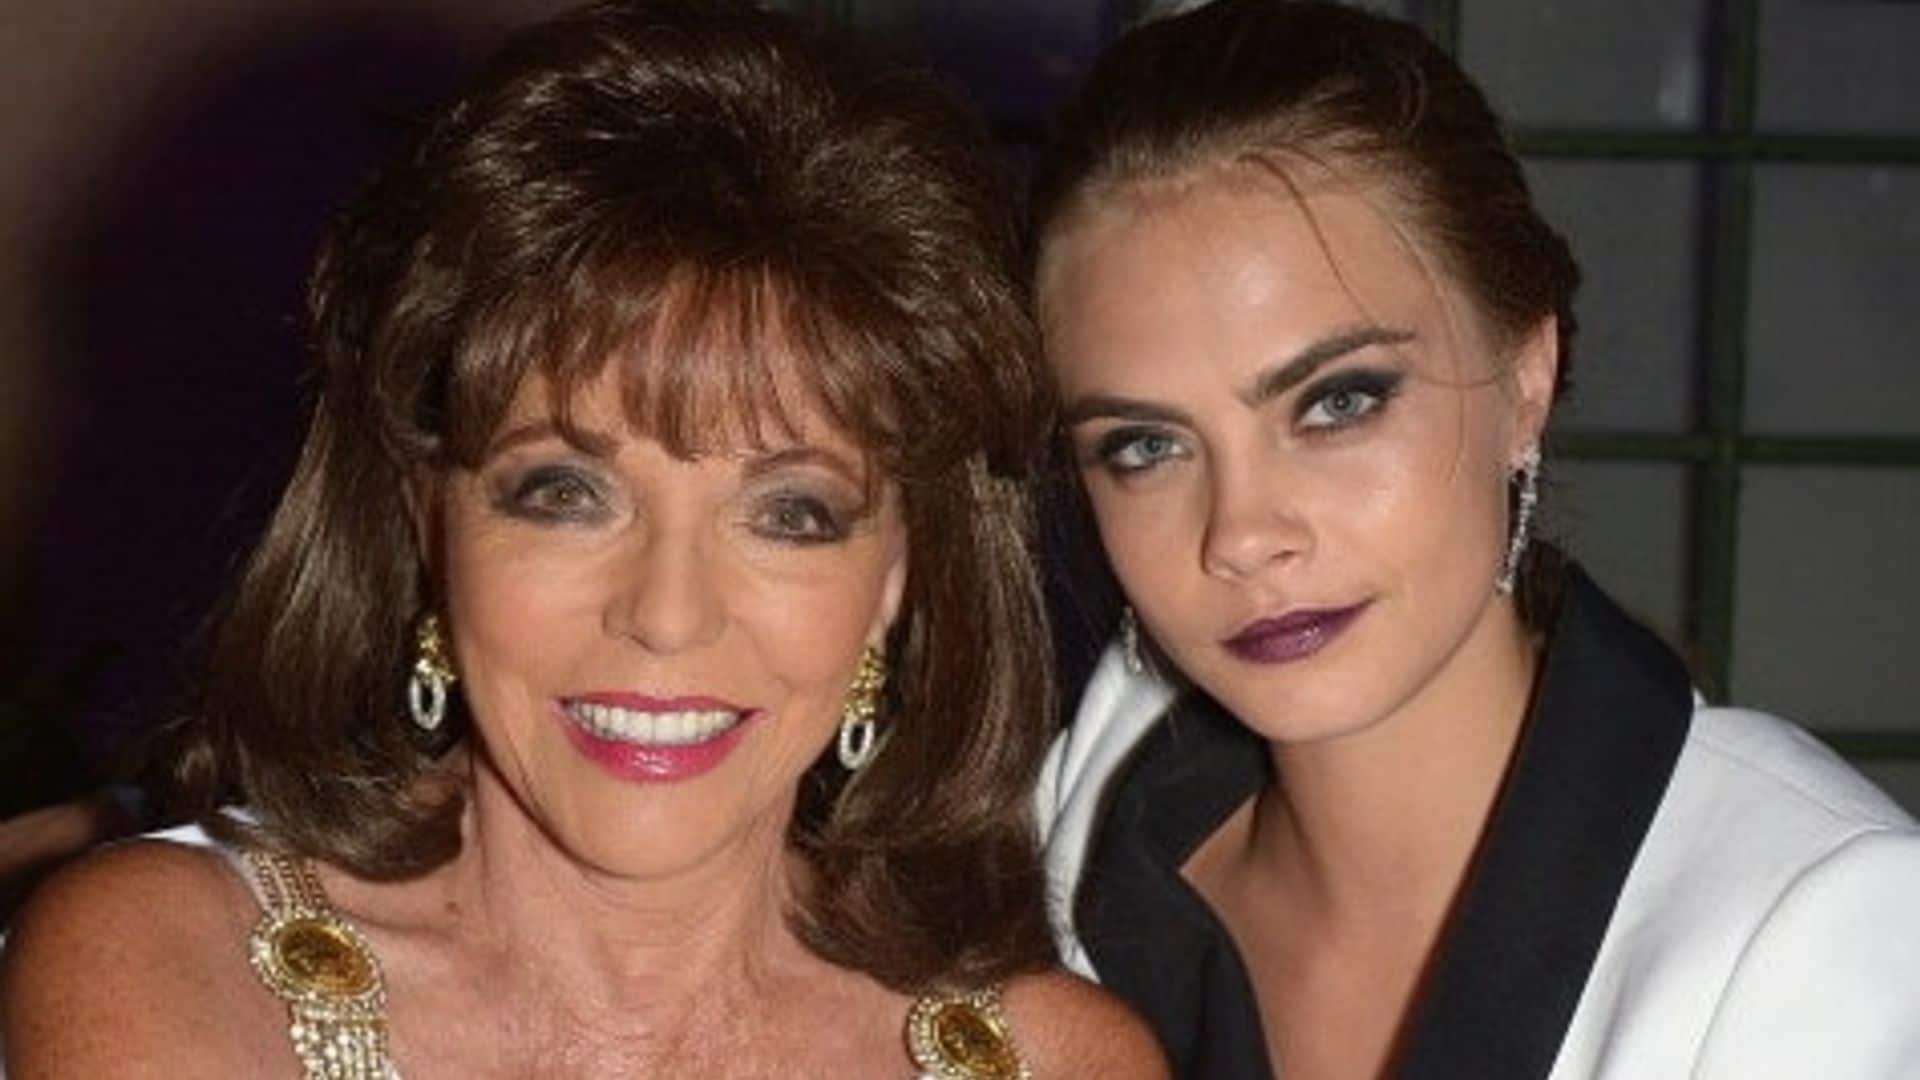 Joan Collins shares a fun fact about Cara Delevingne, spills on icy relationship with 'Dynasty' co-star John Forsythe